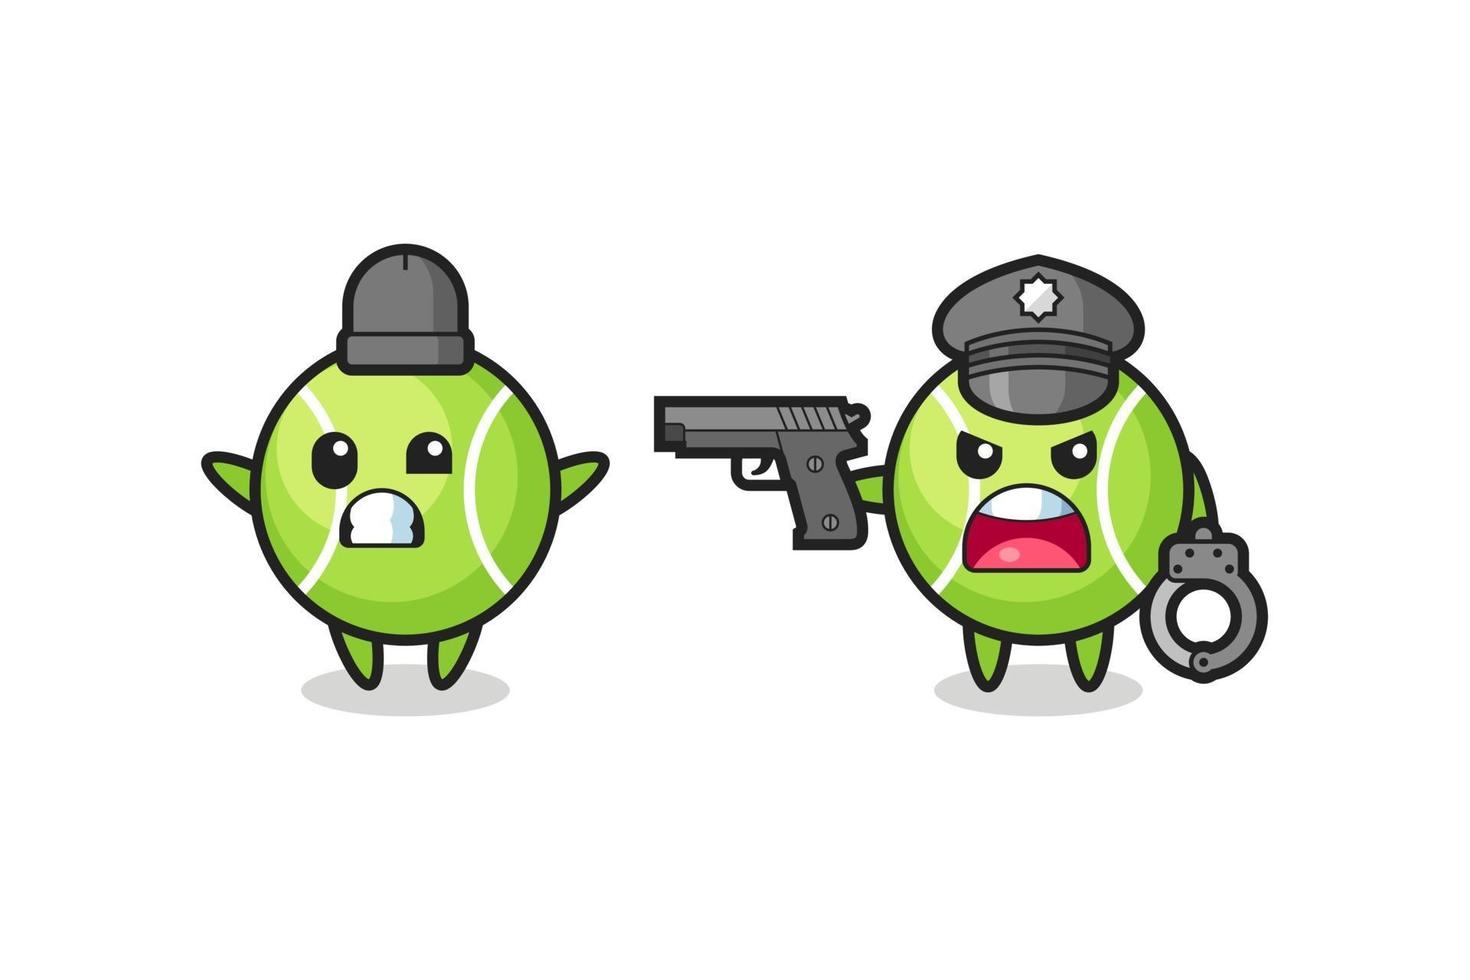 illustration of tennis ball robber with hands up pose caught by police vector